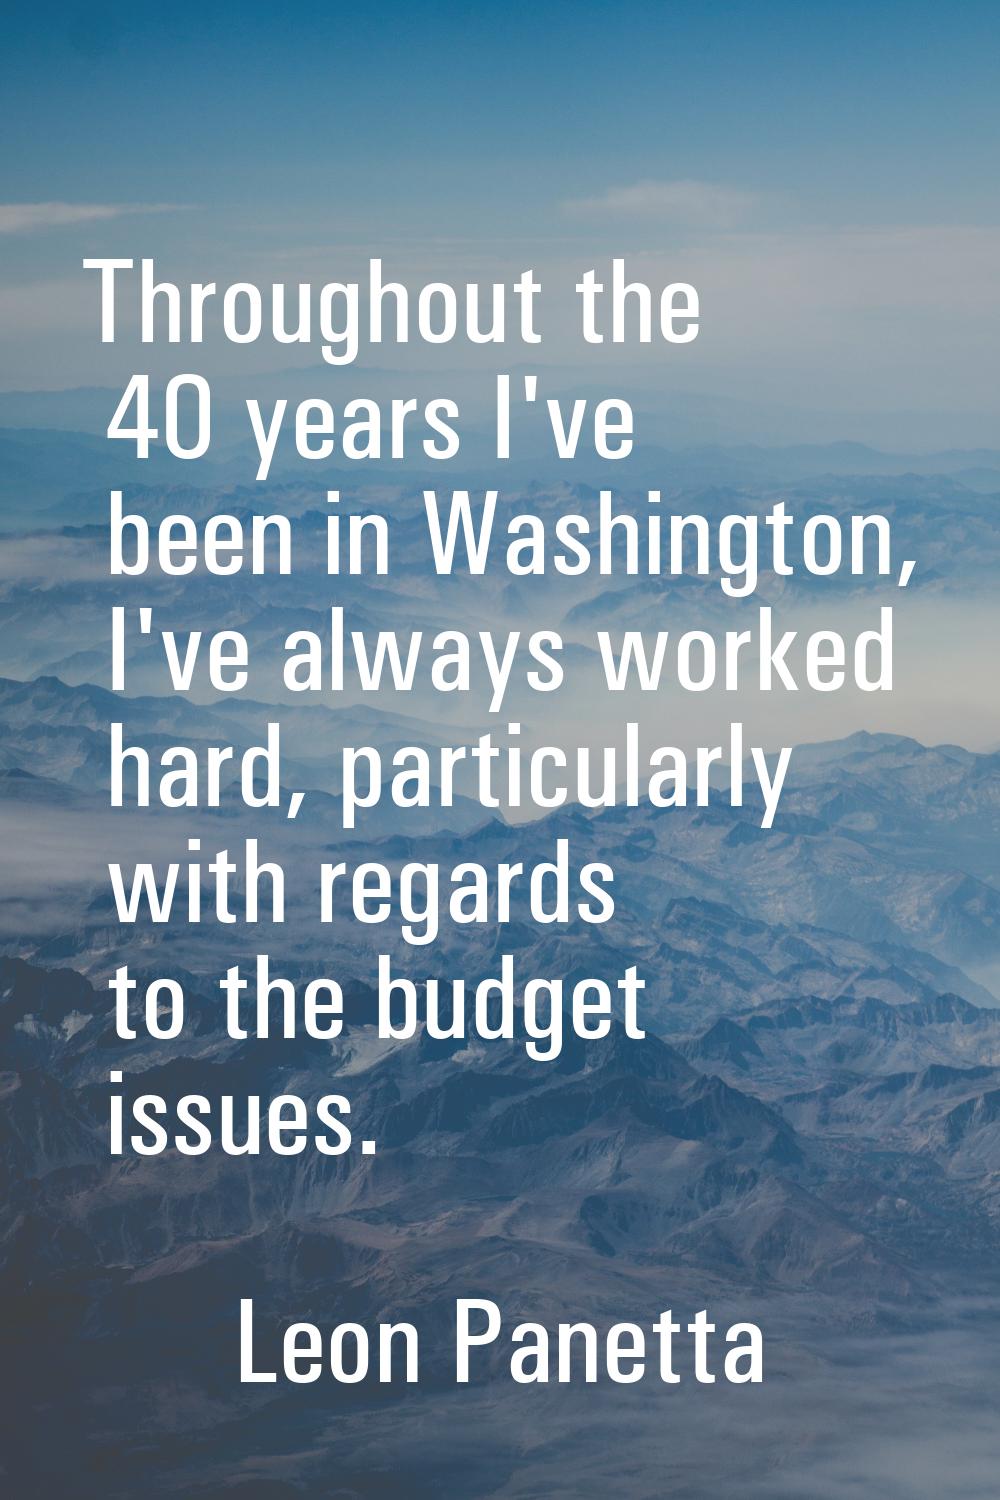 Throughout the 40 years I've been in Washington, I've always worked hard, particularly with regards